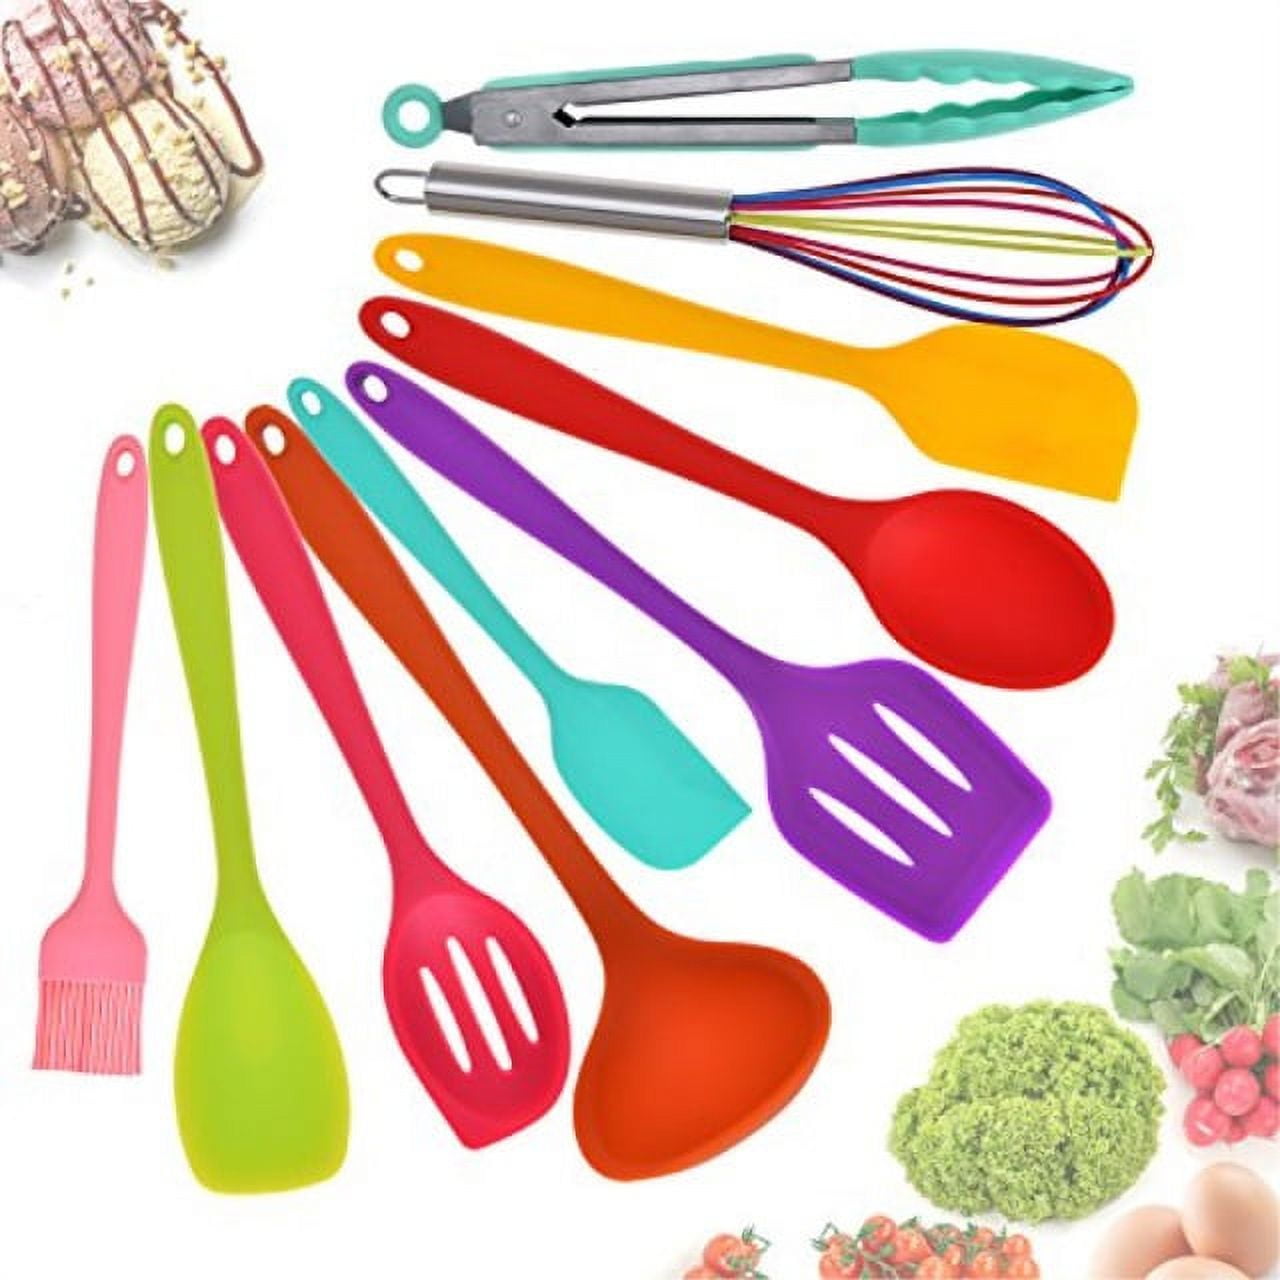 Silicone Cooking Utensils Set of 10, Kitchen Utensils for Nonstick